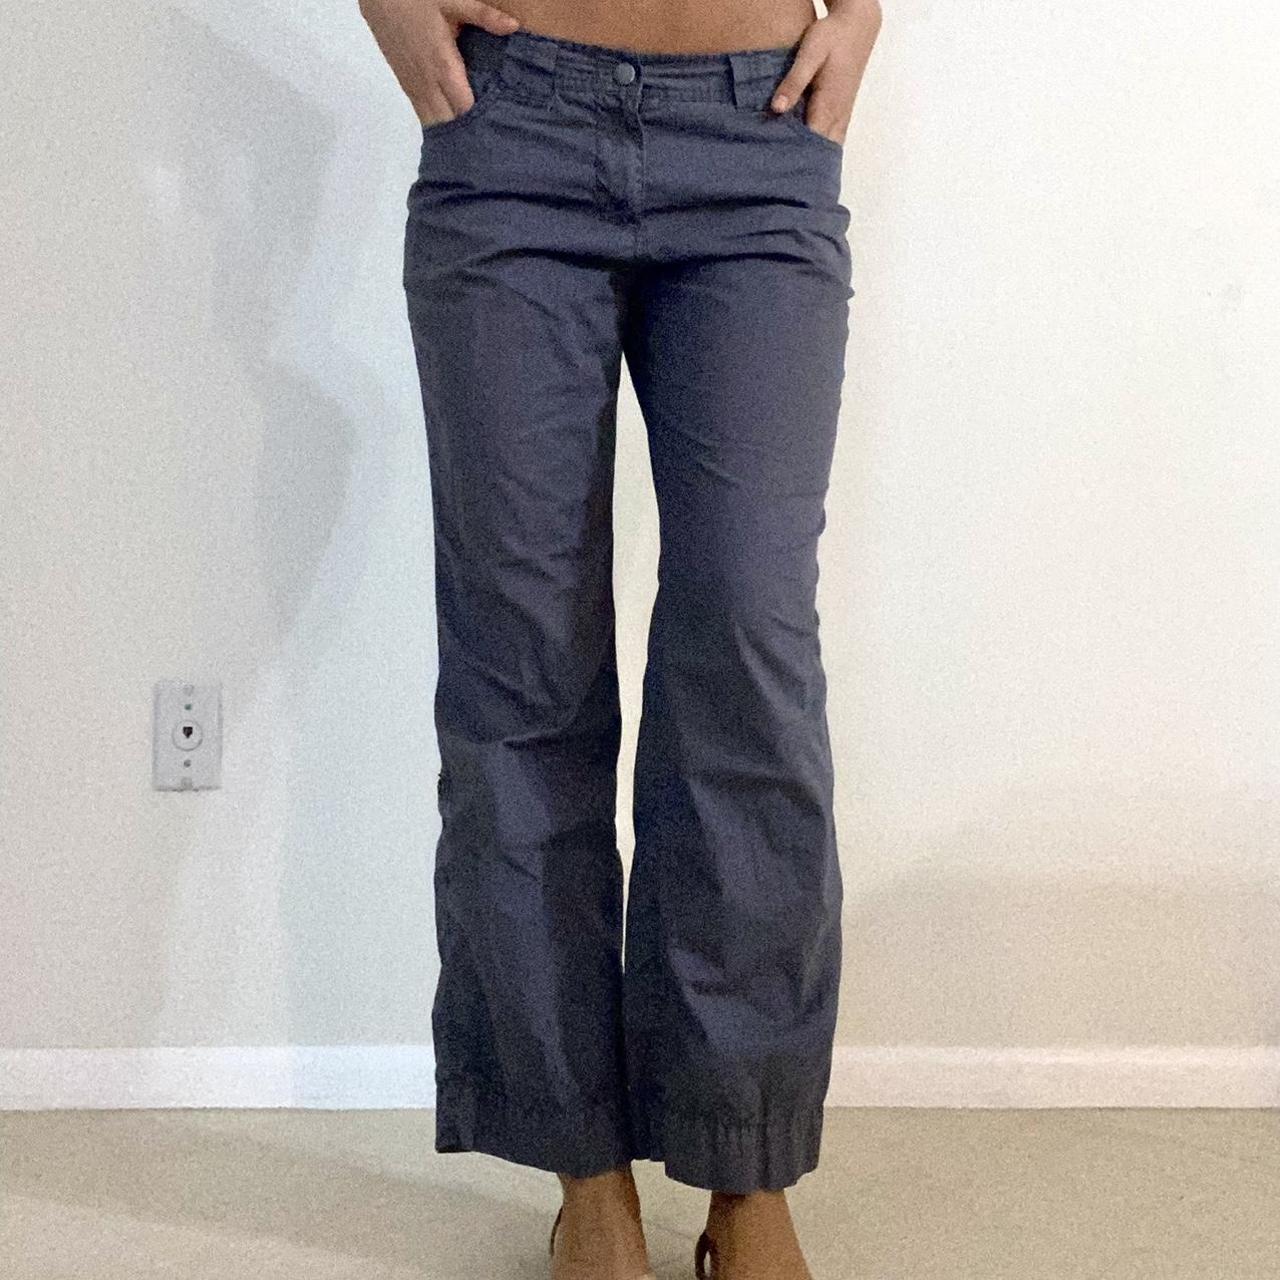 blue gray lowrise cargo pants! i'm 5'9 so they're - Depop